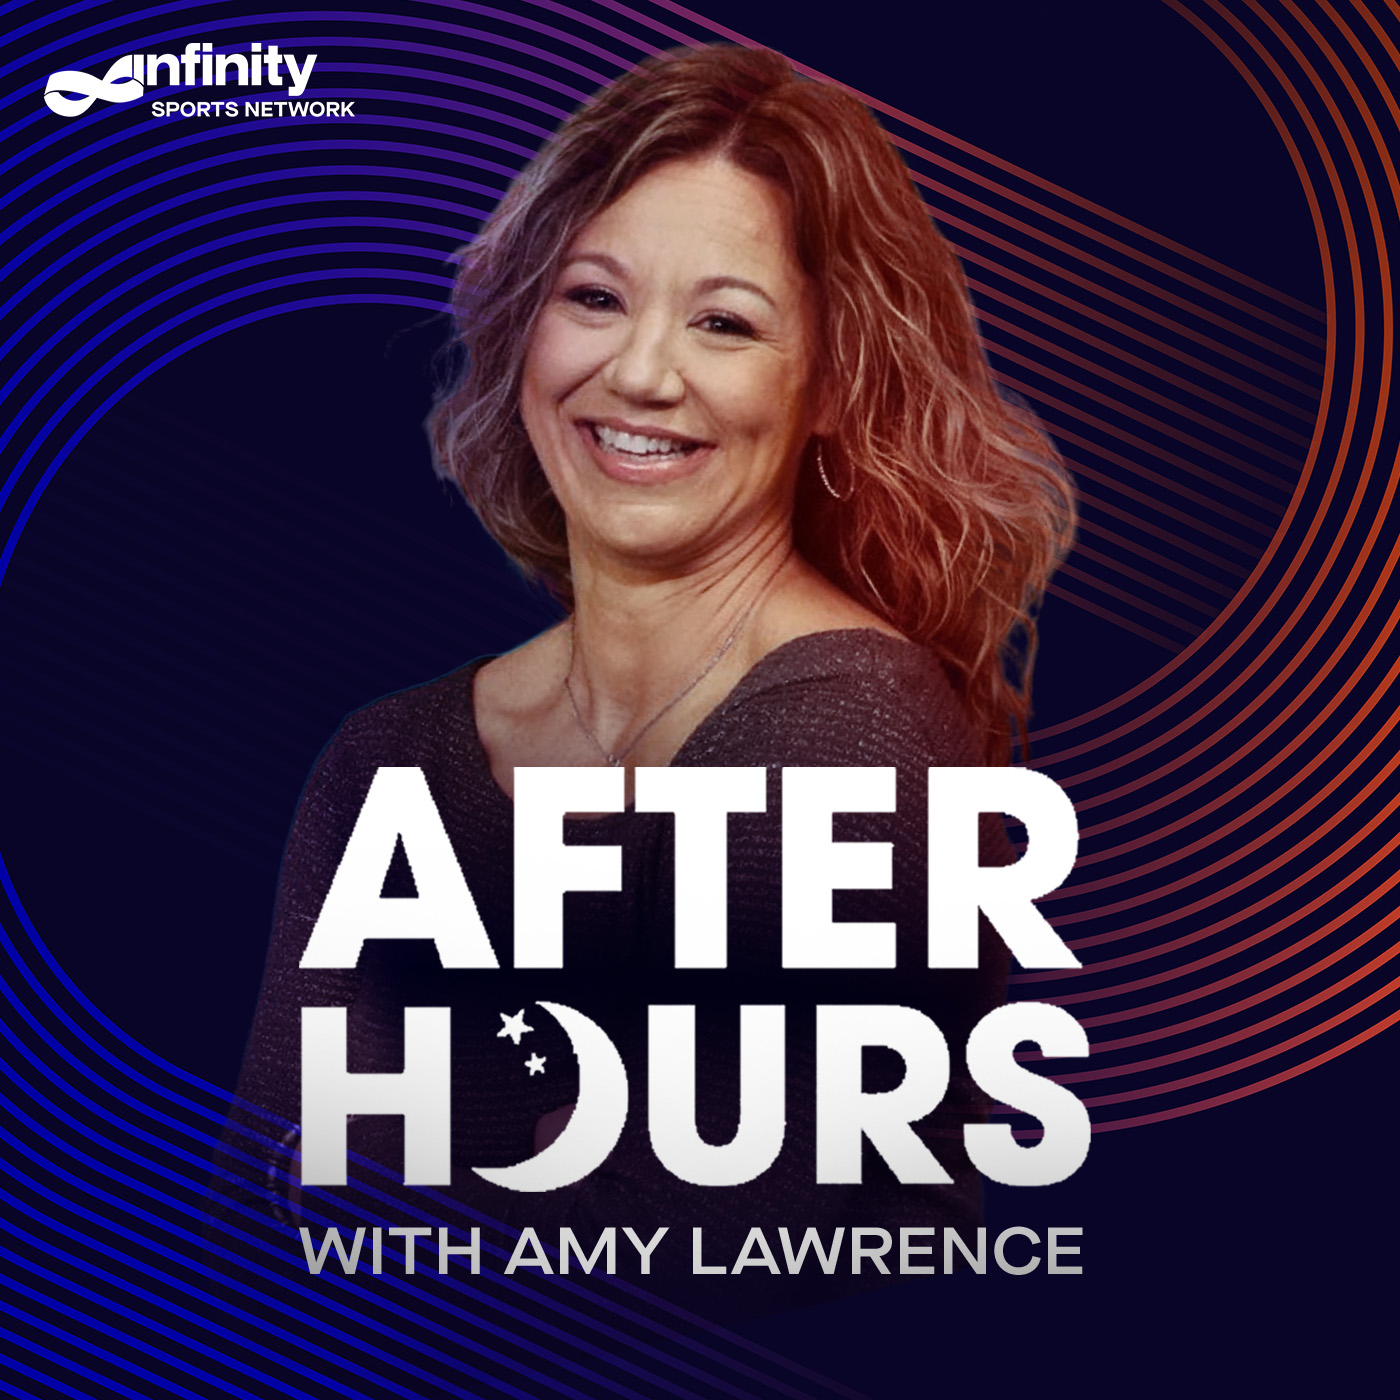 10-19-21 After Hours with Amy Lawrence PODCAST: Hour 2